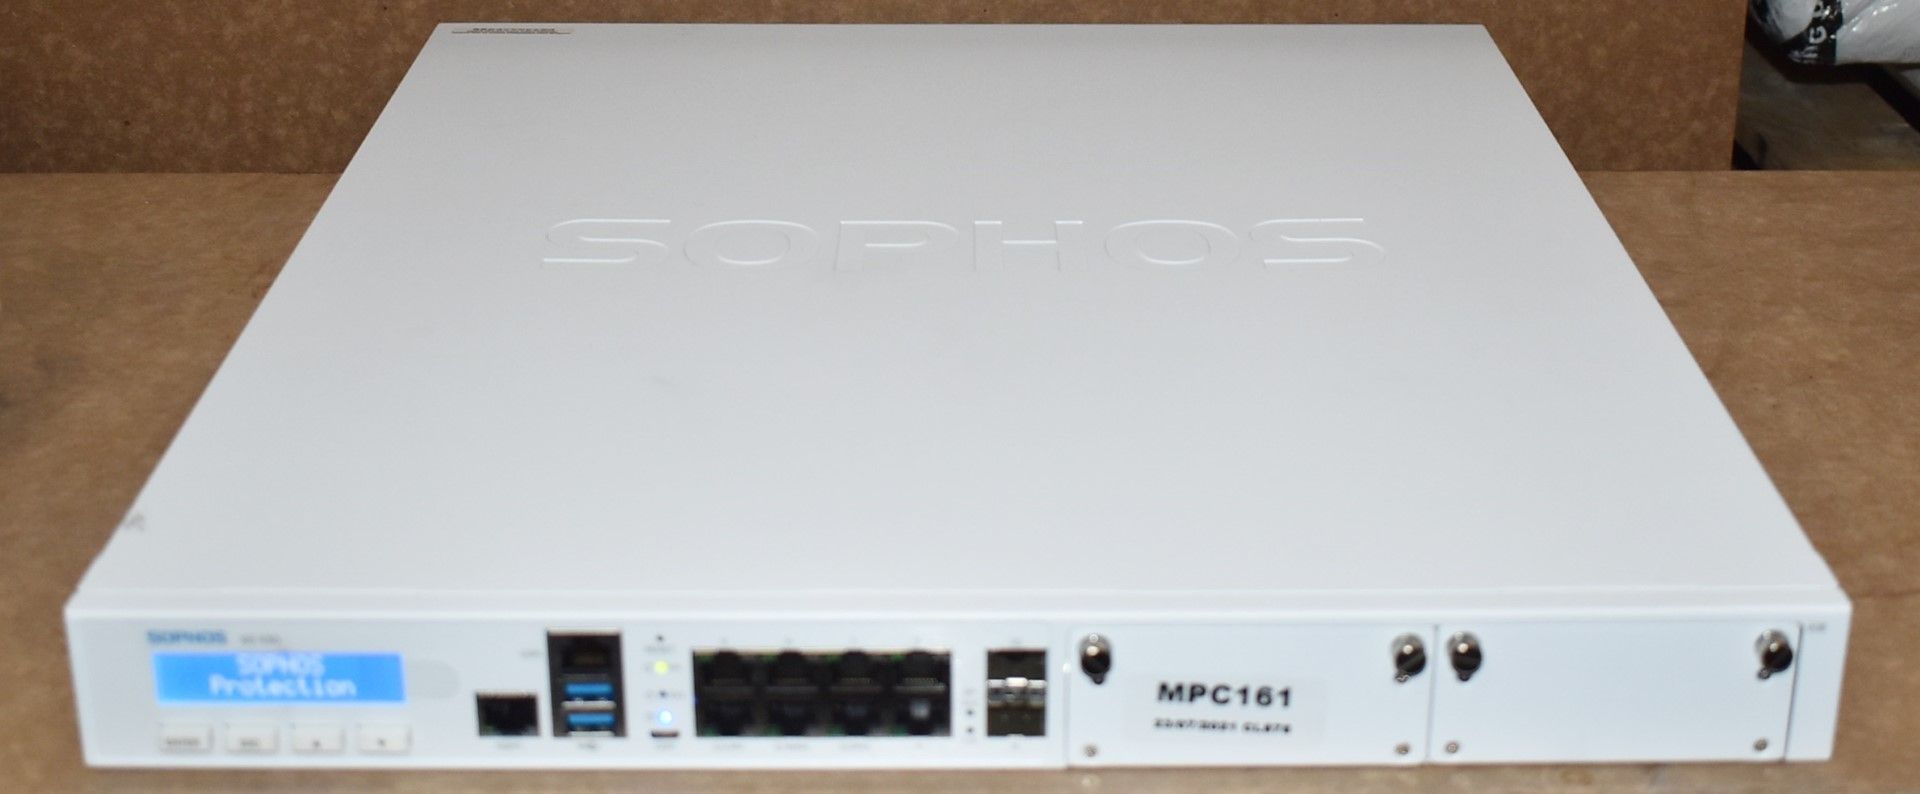 1 x Sophos XG430 Edge Firewall Appliance - Rev2 - Manufactured Jan 2019 - Includes Power Cable - - Image 3 of 11